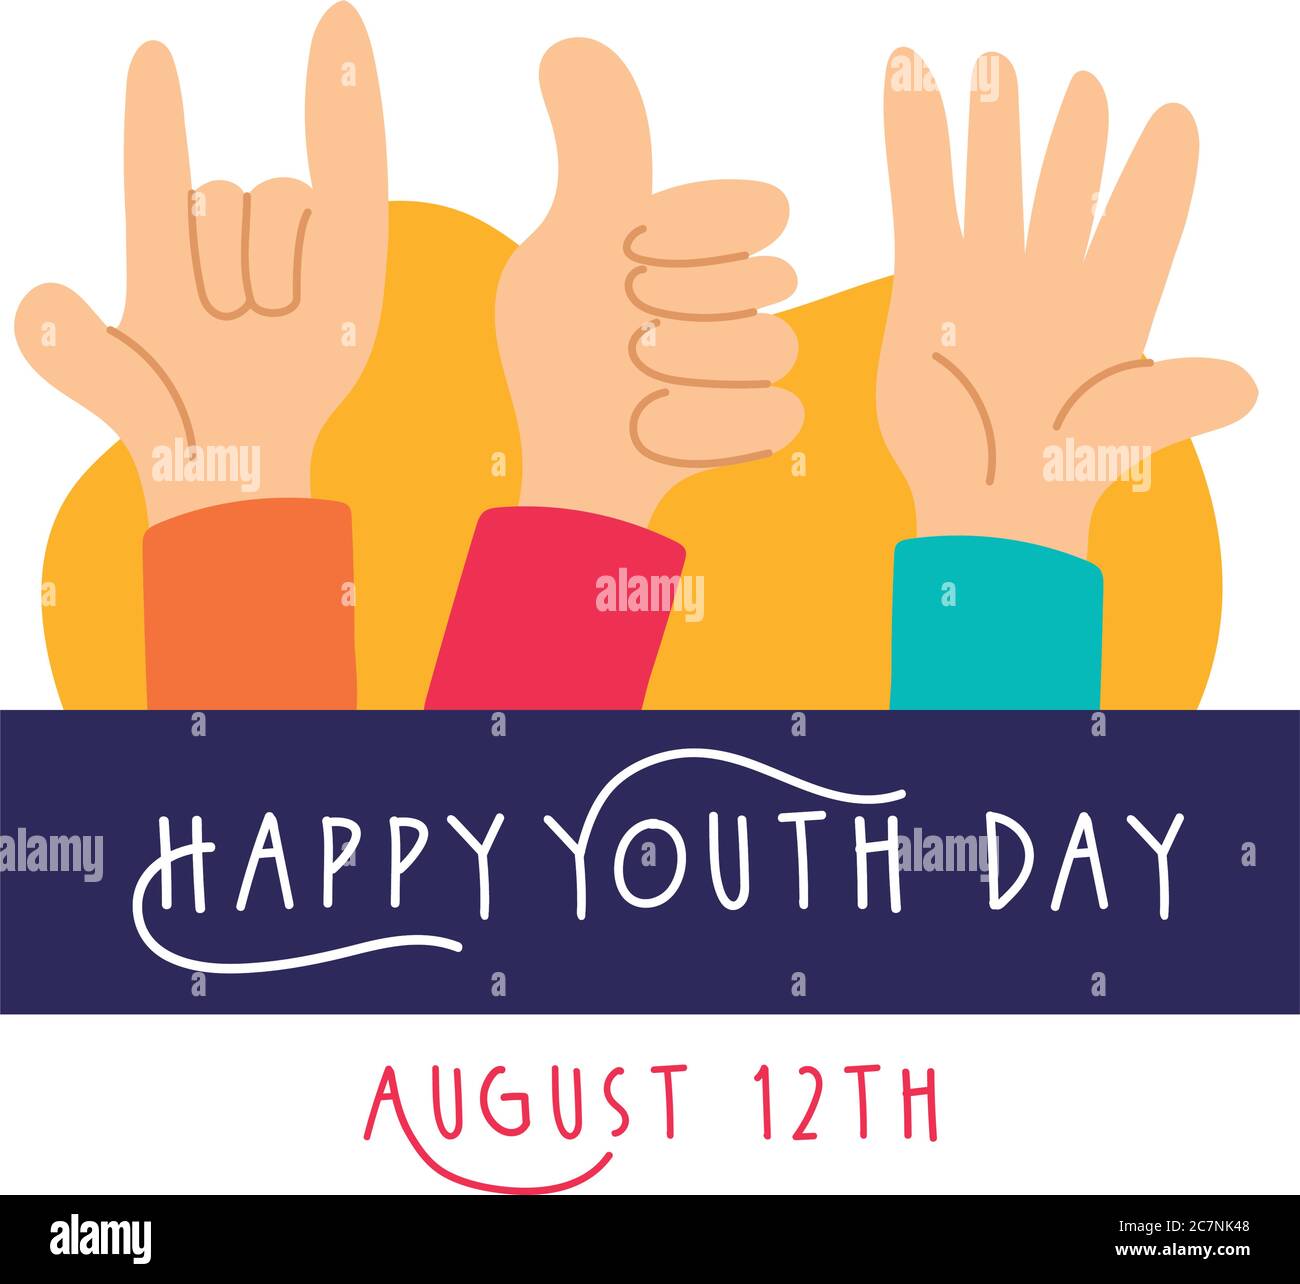 happy youth day lettering with hands symbols flat style vector illustration design Stock Vector